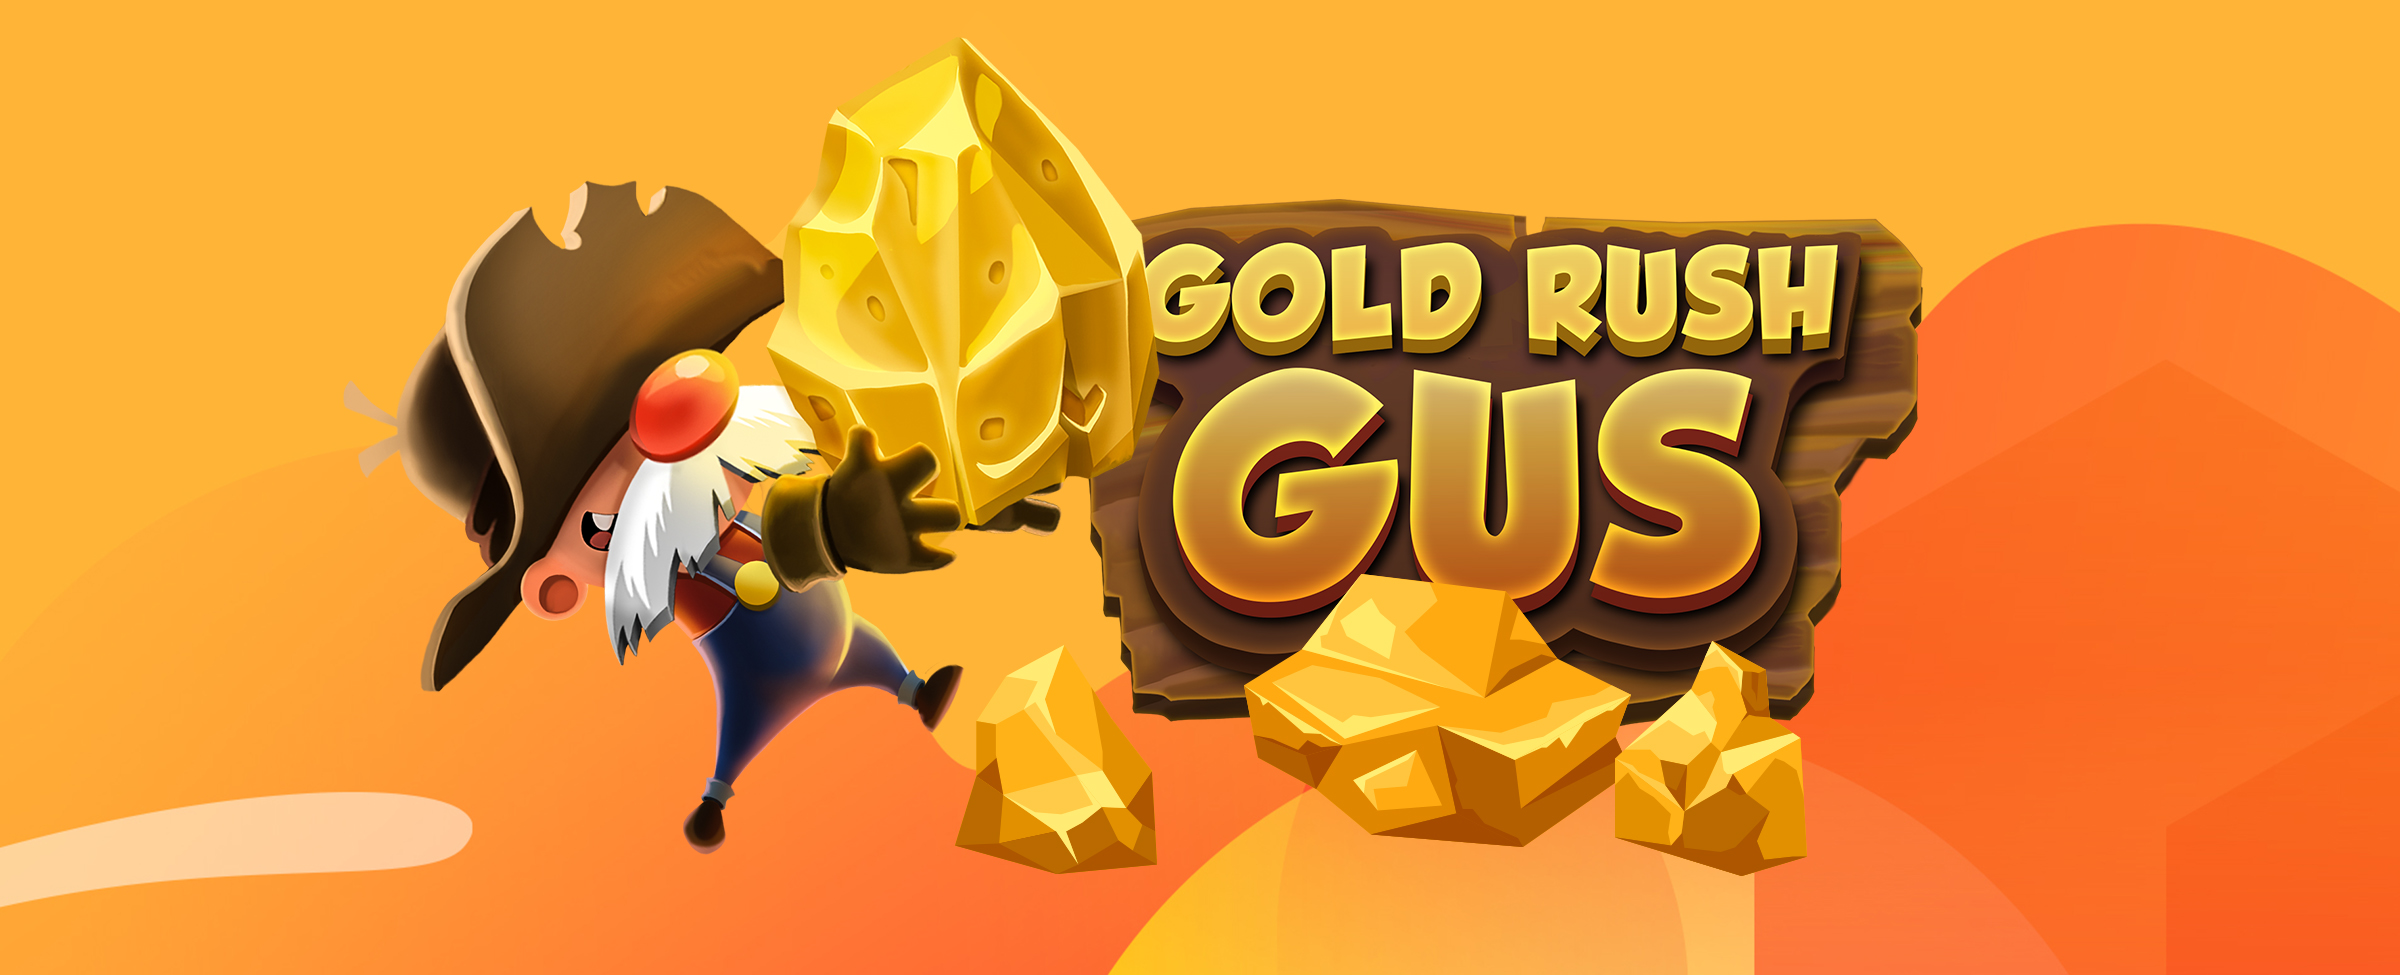 If you love this game, you must check out the original! Give Gold Rush Gus a try and find out why this game is high on the list of player favorites.